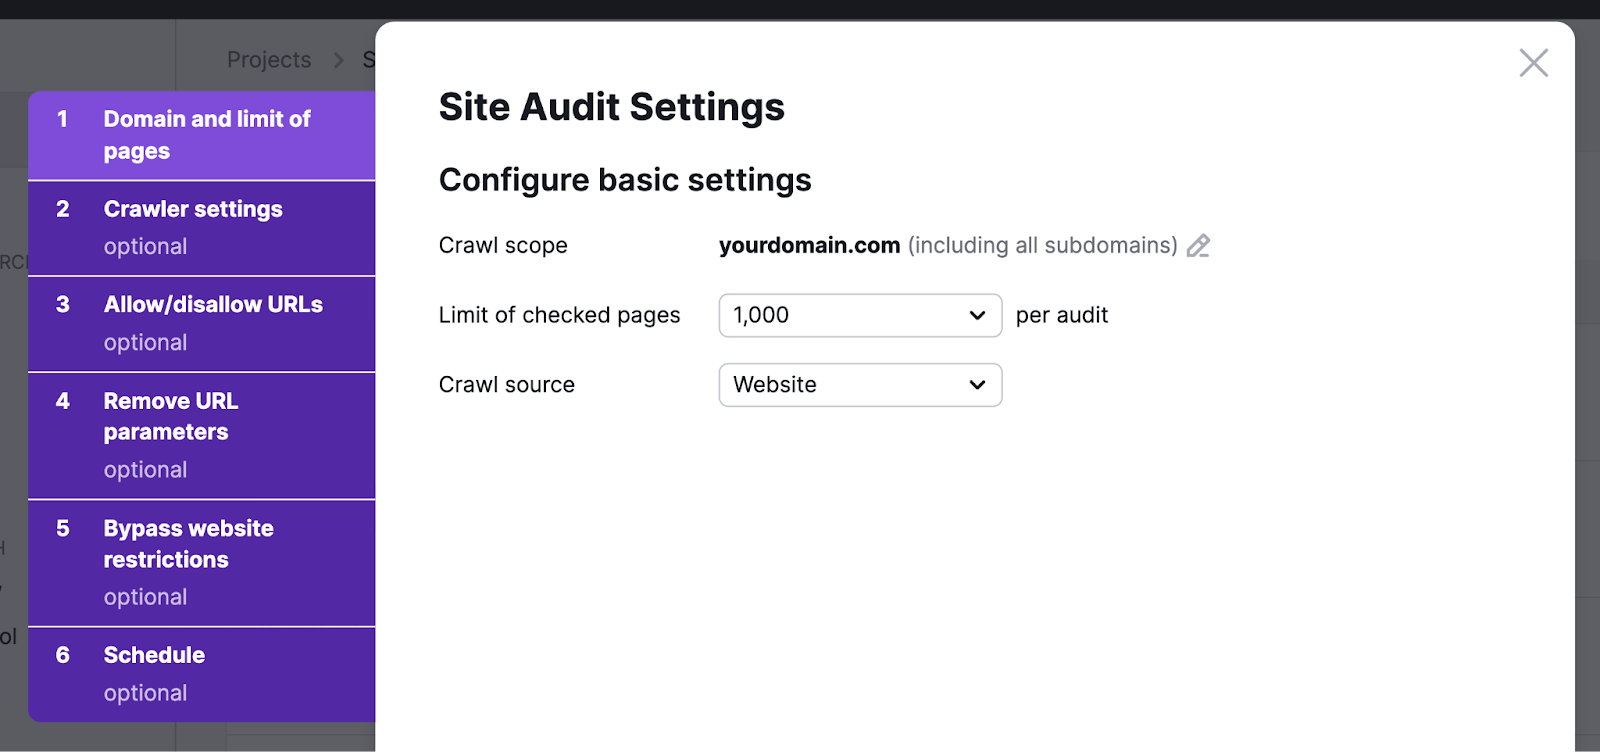 Limit of checked pages acceptable   to 1000 per audit successful  Site Audit settings